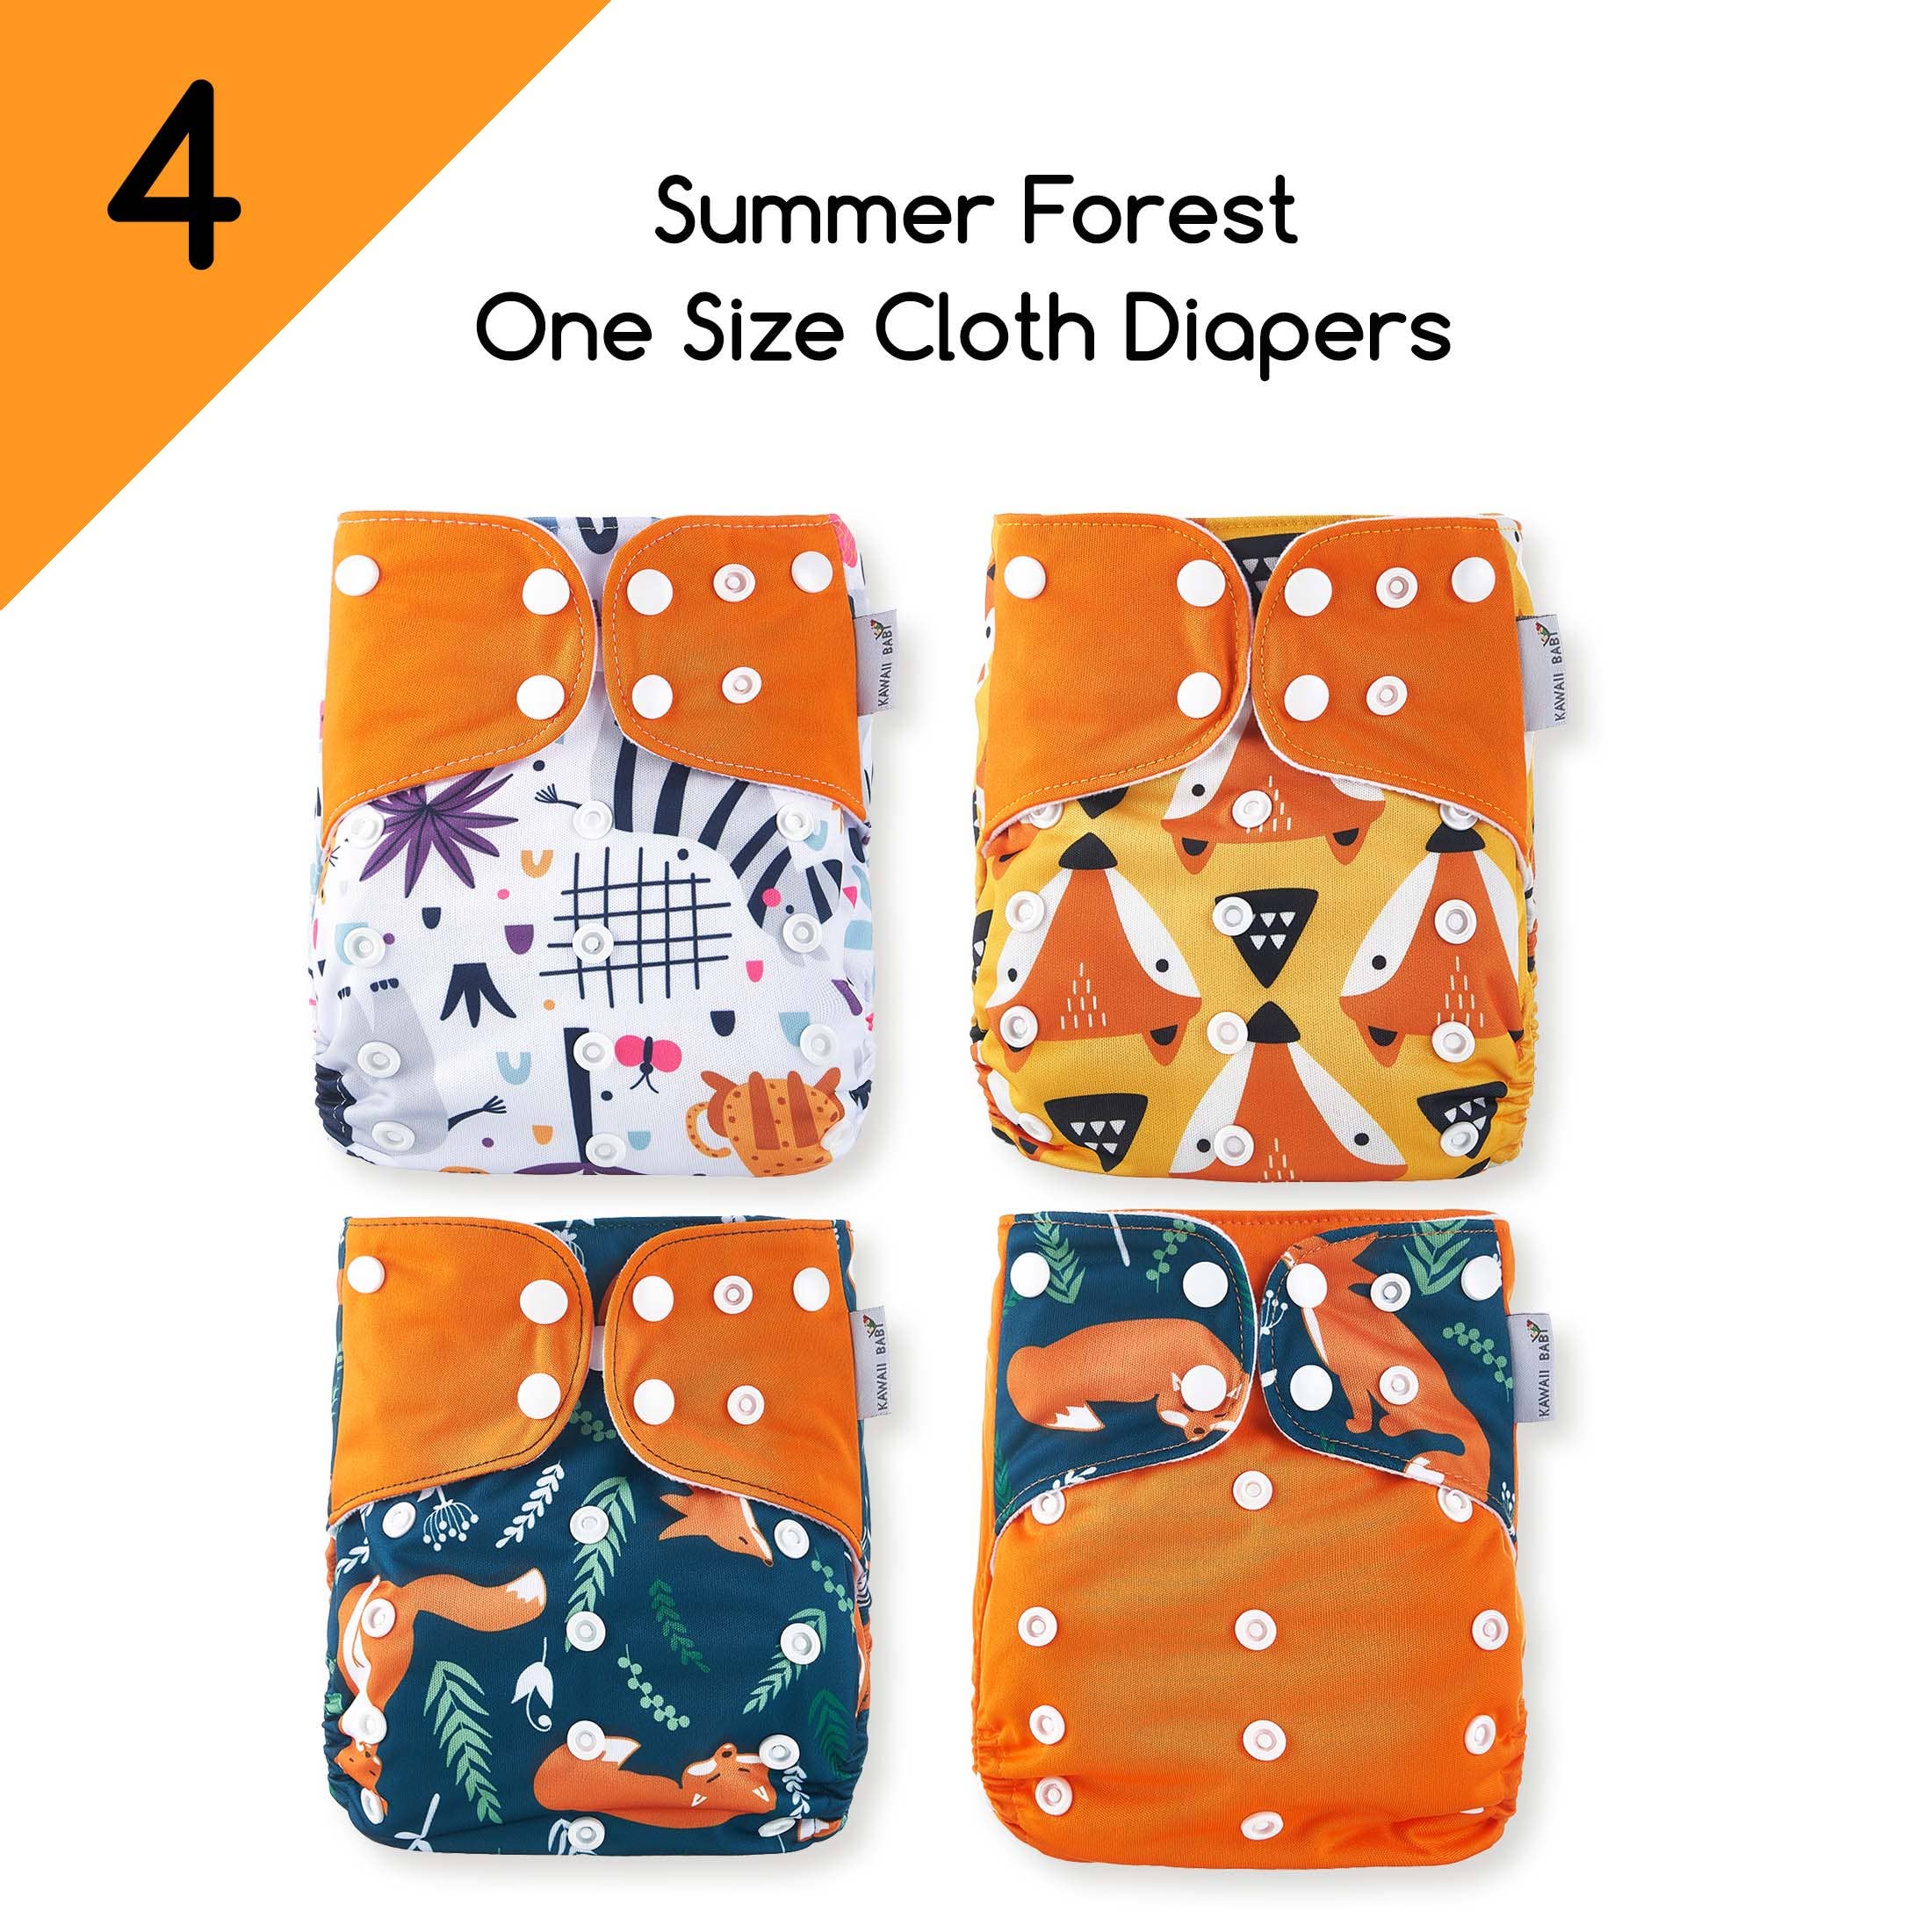 Pack of 12. KaWaii Baby One Size Heavy Duty HD3 Pocket Cloth Diapers 